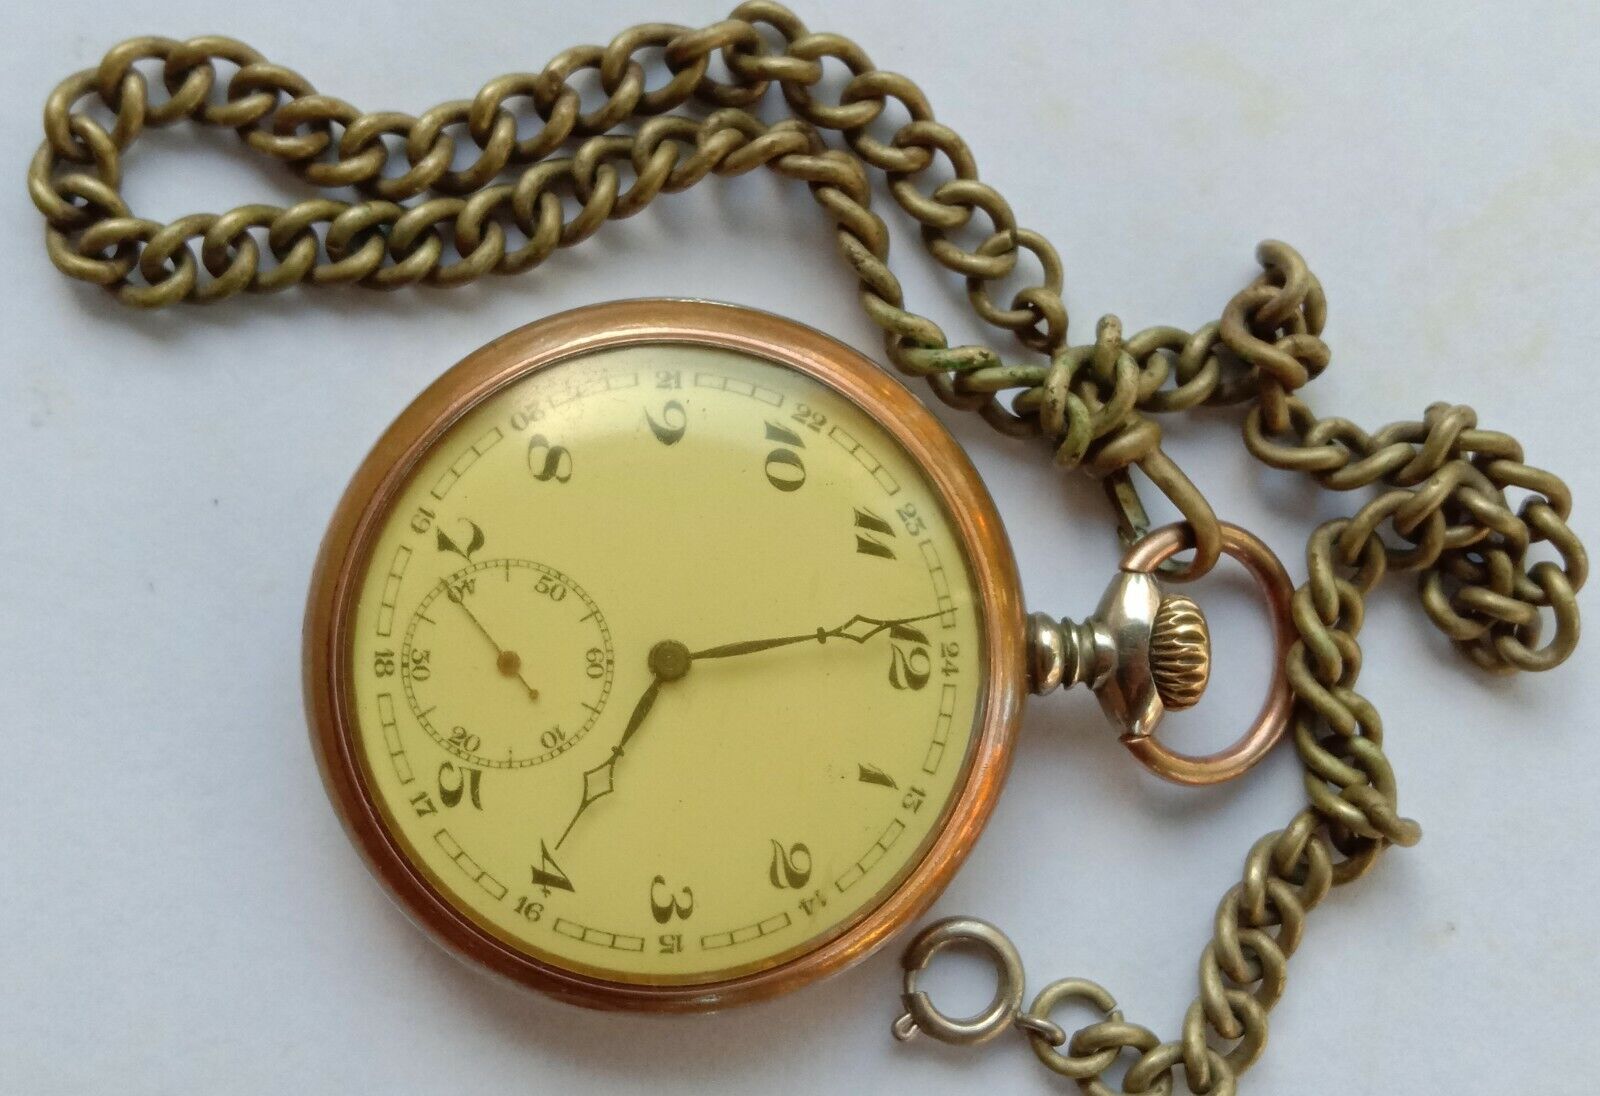 Revue.  Antique pocket watch. Swiss made. Early 1900s. Going strong.